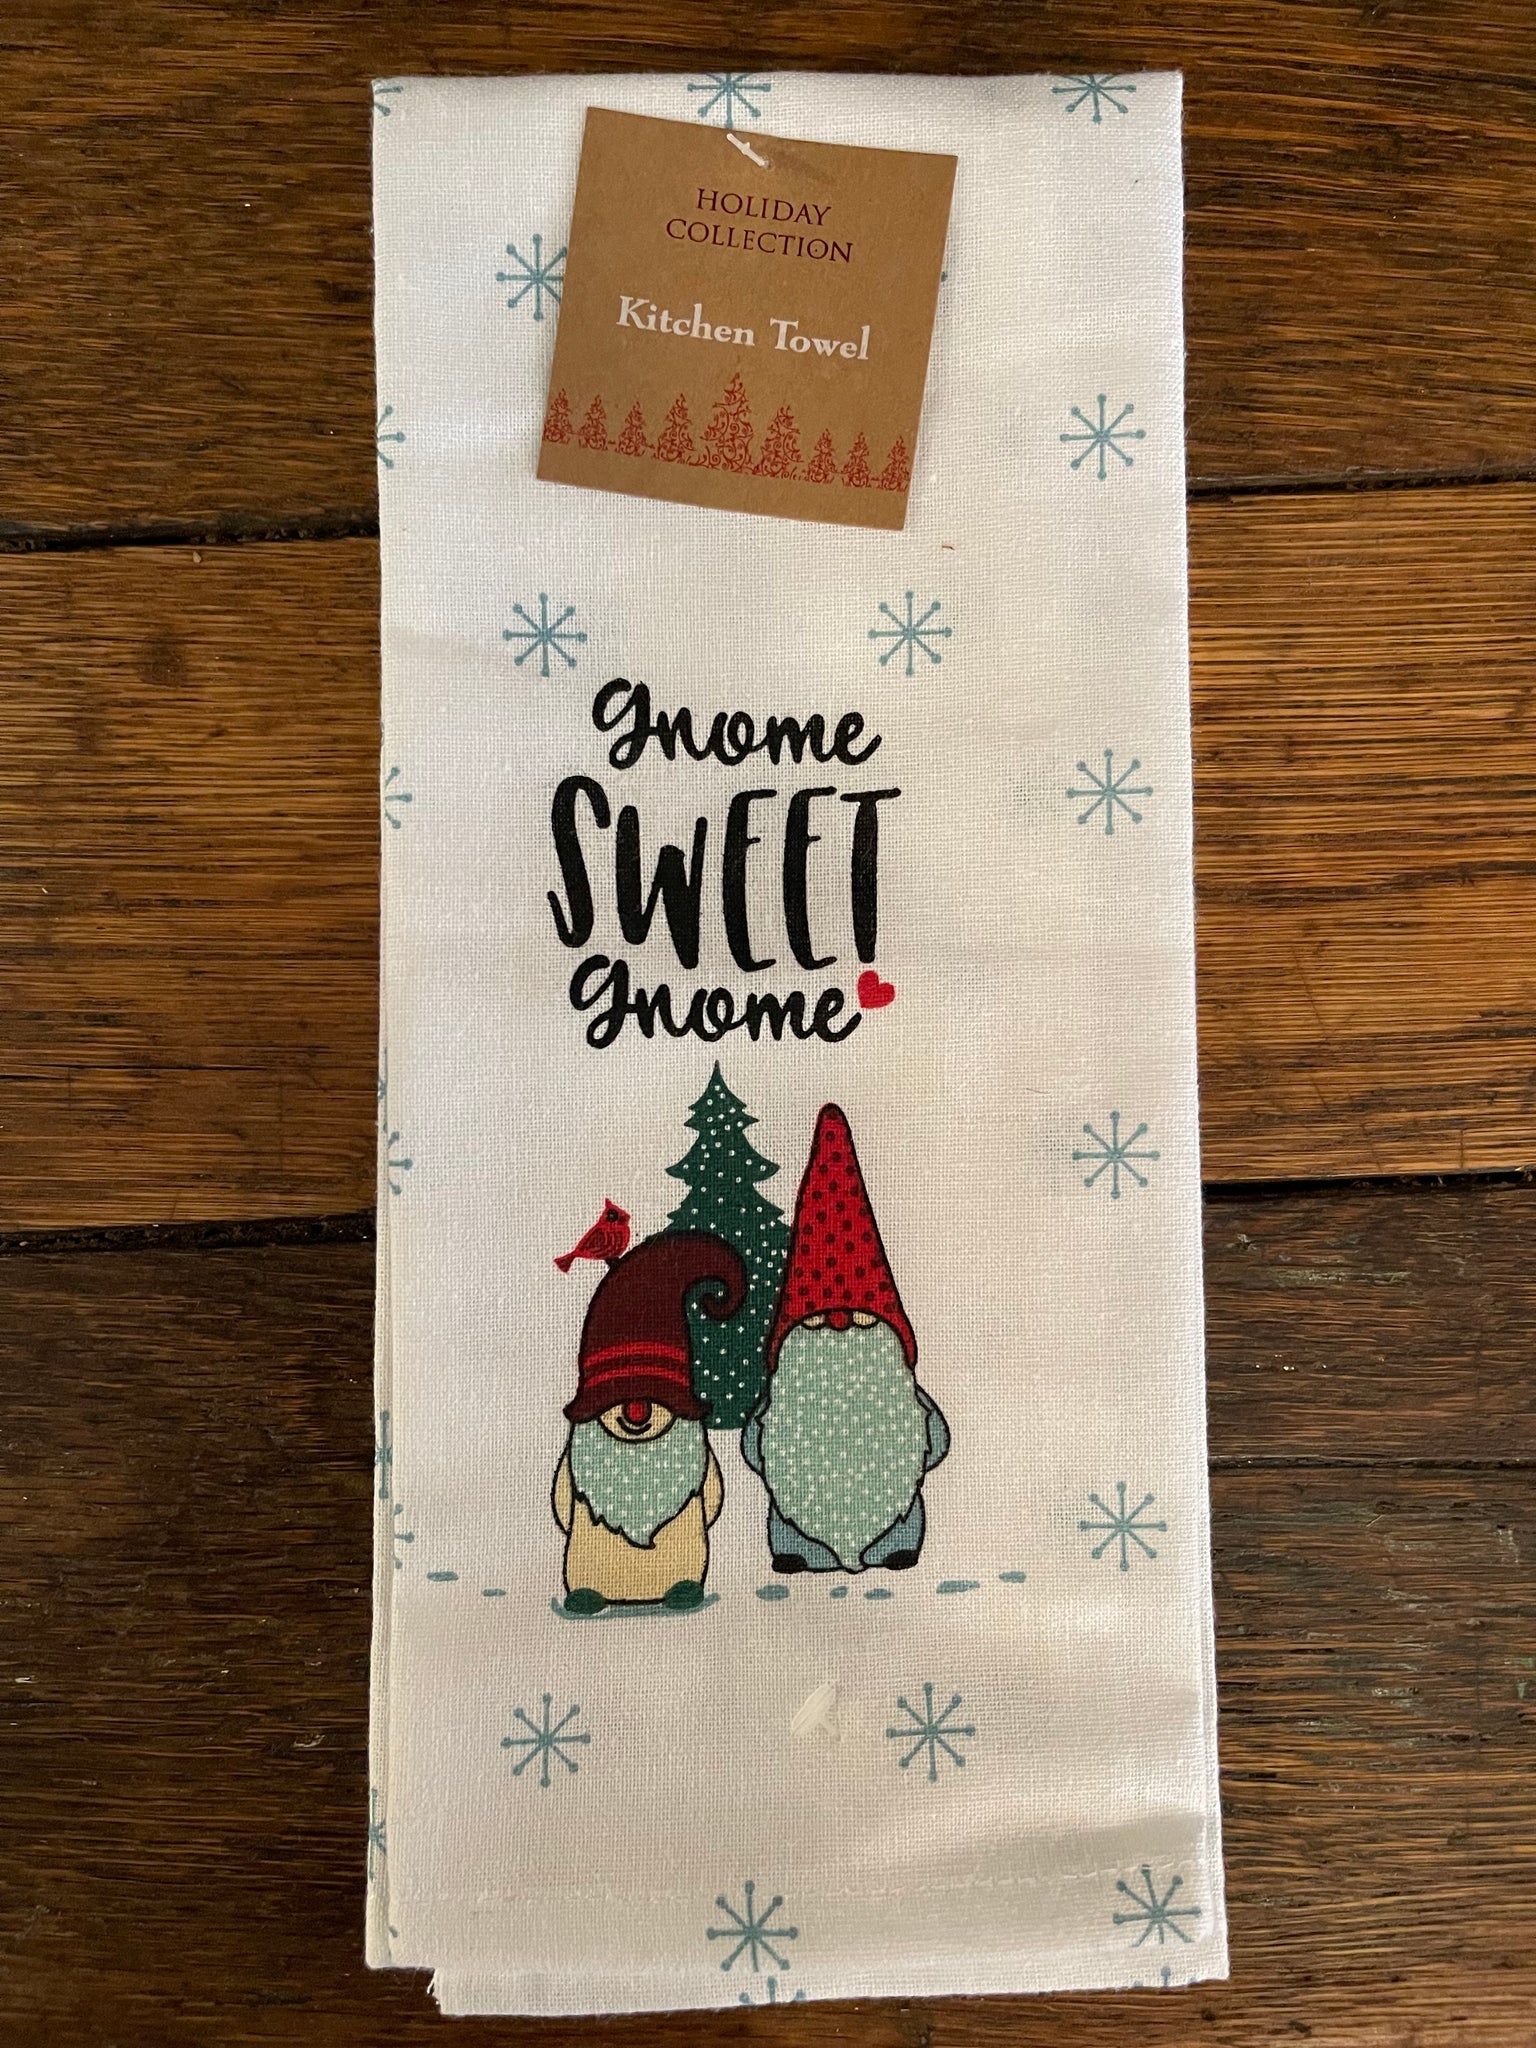 Holiday Collection “Gnome Sweet Gnome” Kitchen Towel